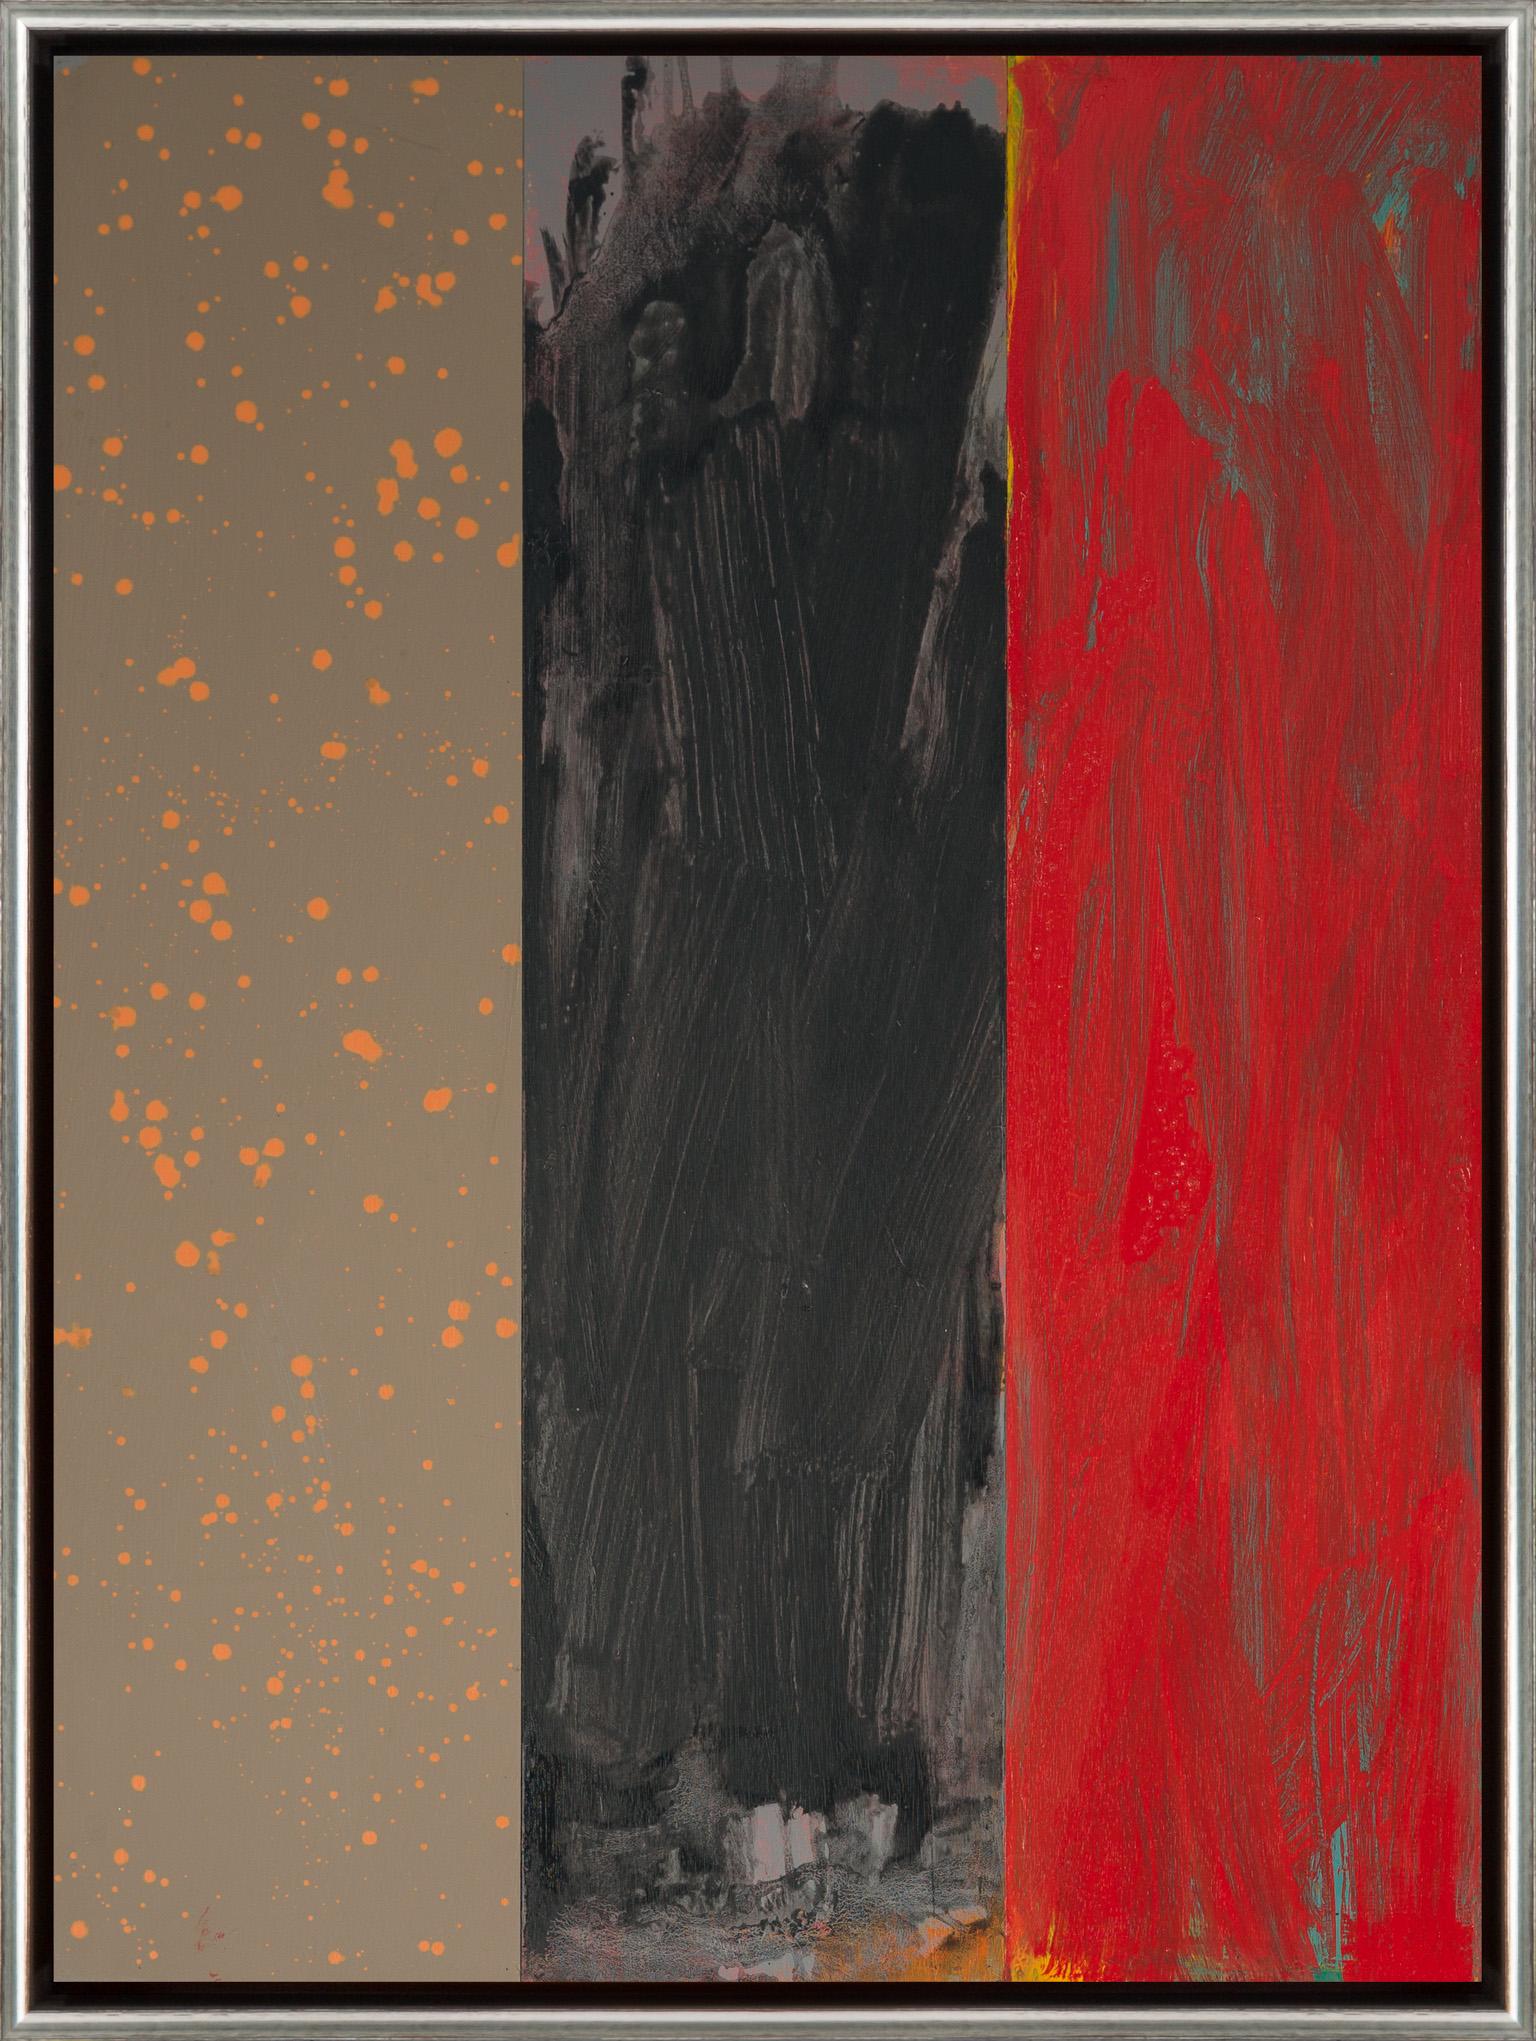 David Rothermel Abstract Painting - "Vulcana" Brown, Red, and Black Colorblocking on Panel